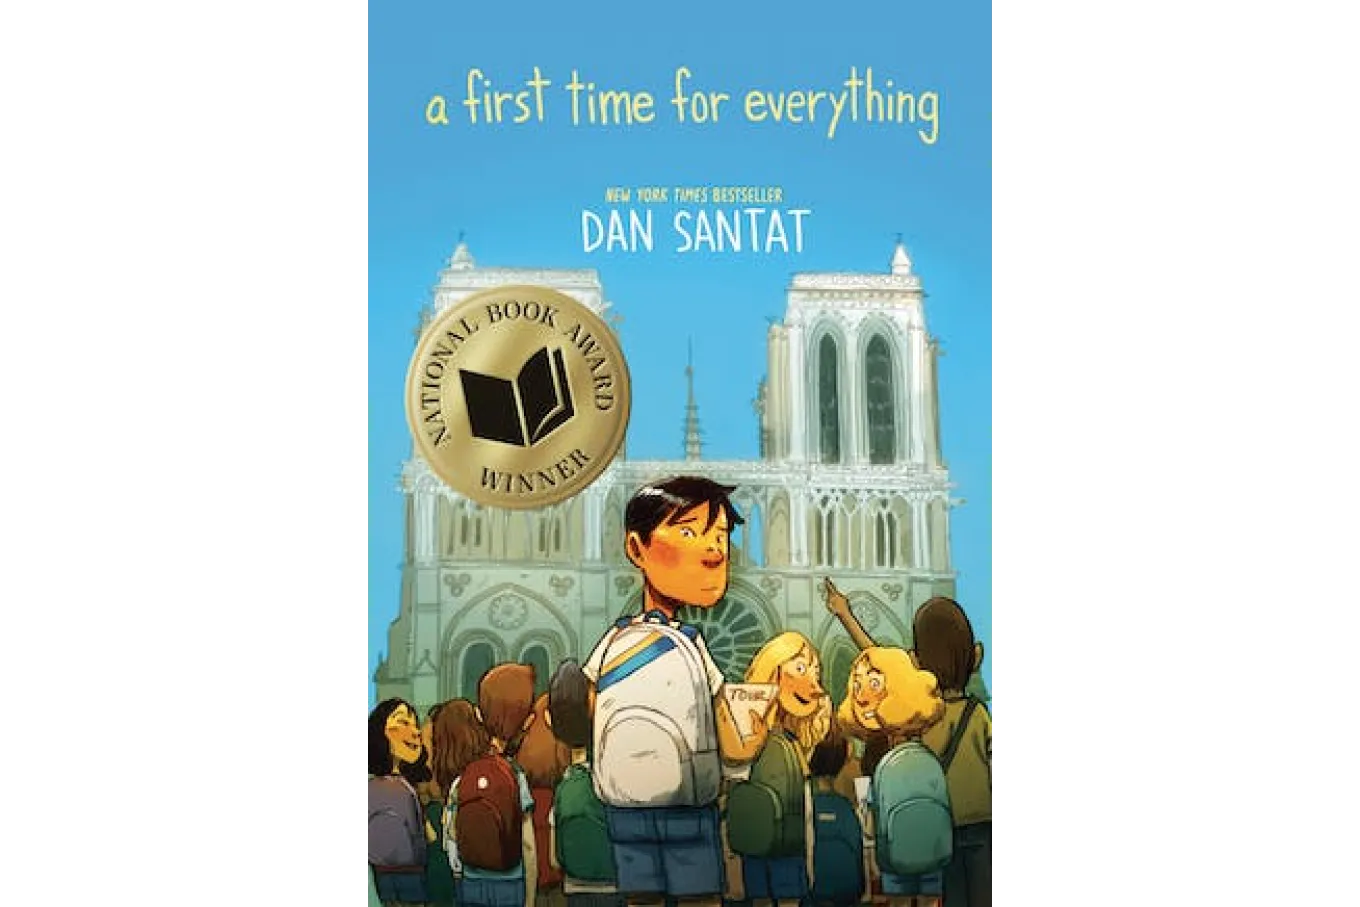 Cover of a First Time for Everything